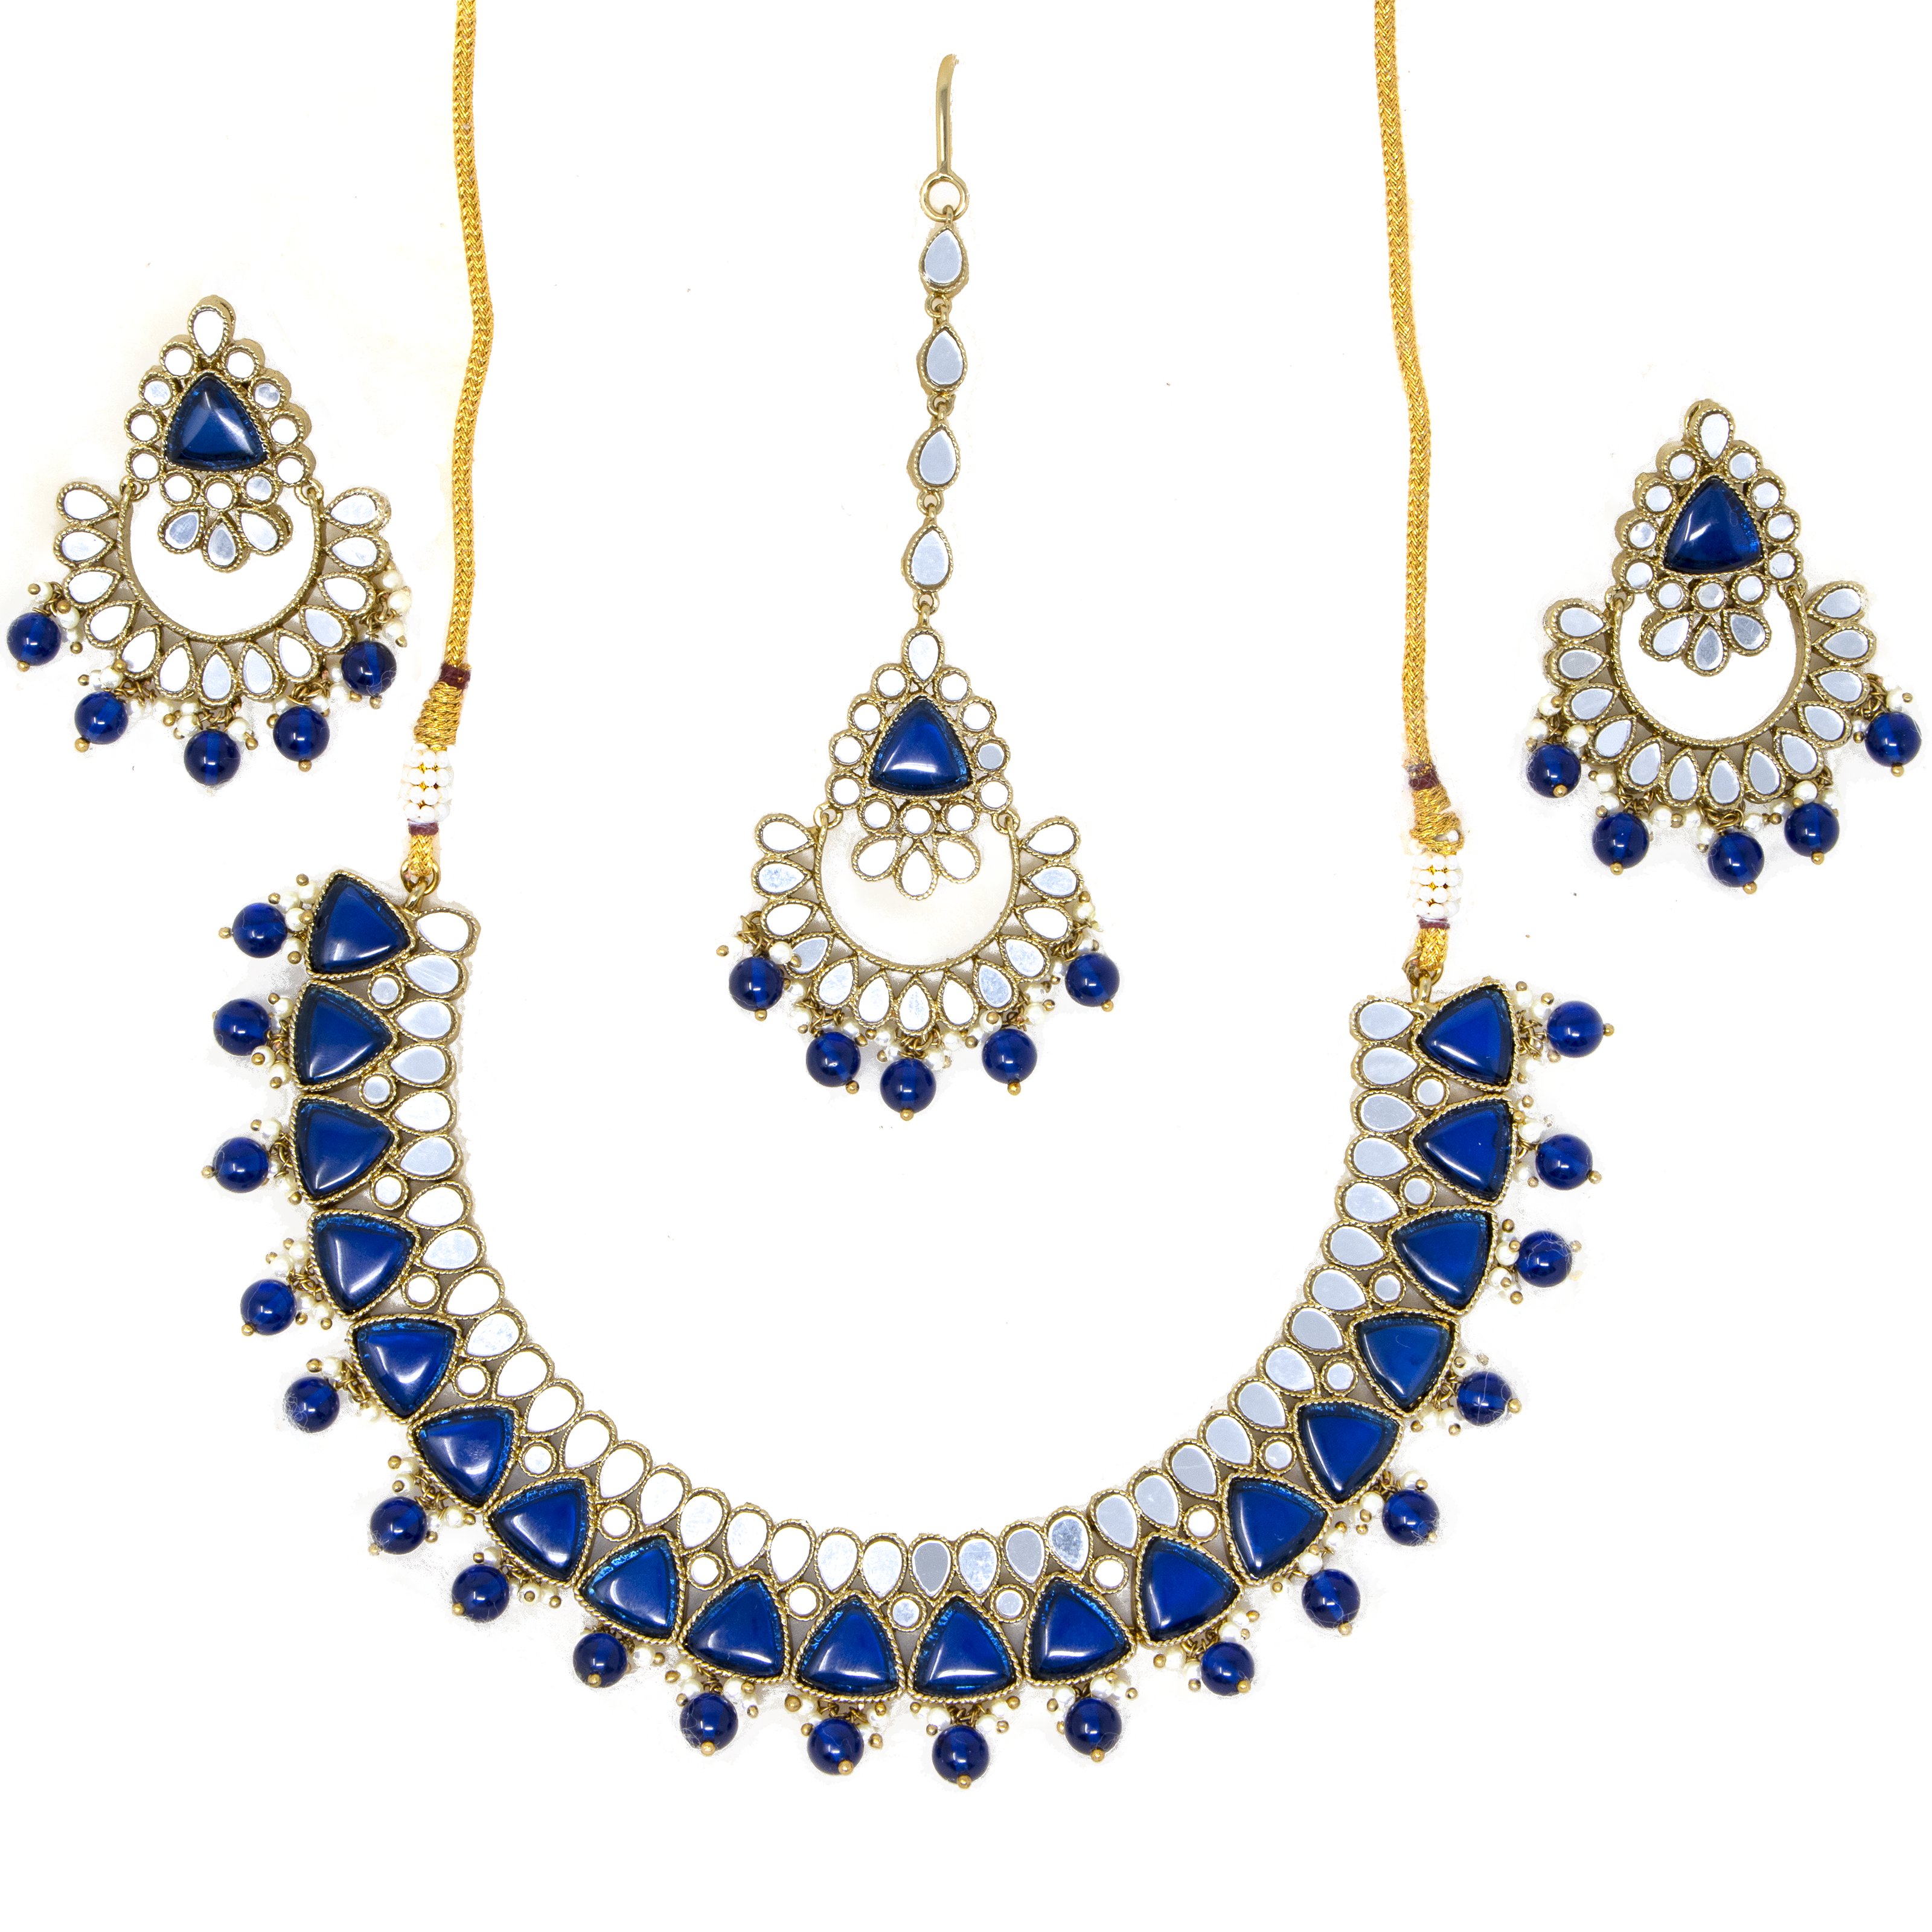 Silver/blue jewelry set- Necklace, earrings,& bindi with mirror work & blue stones